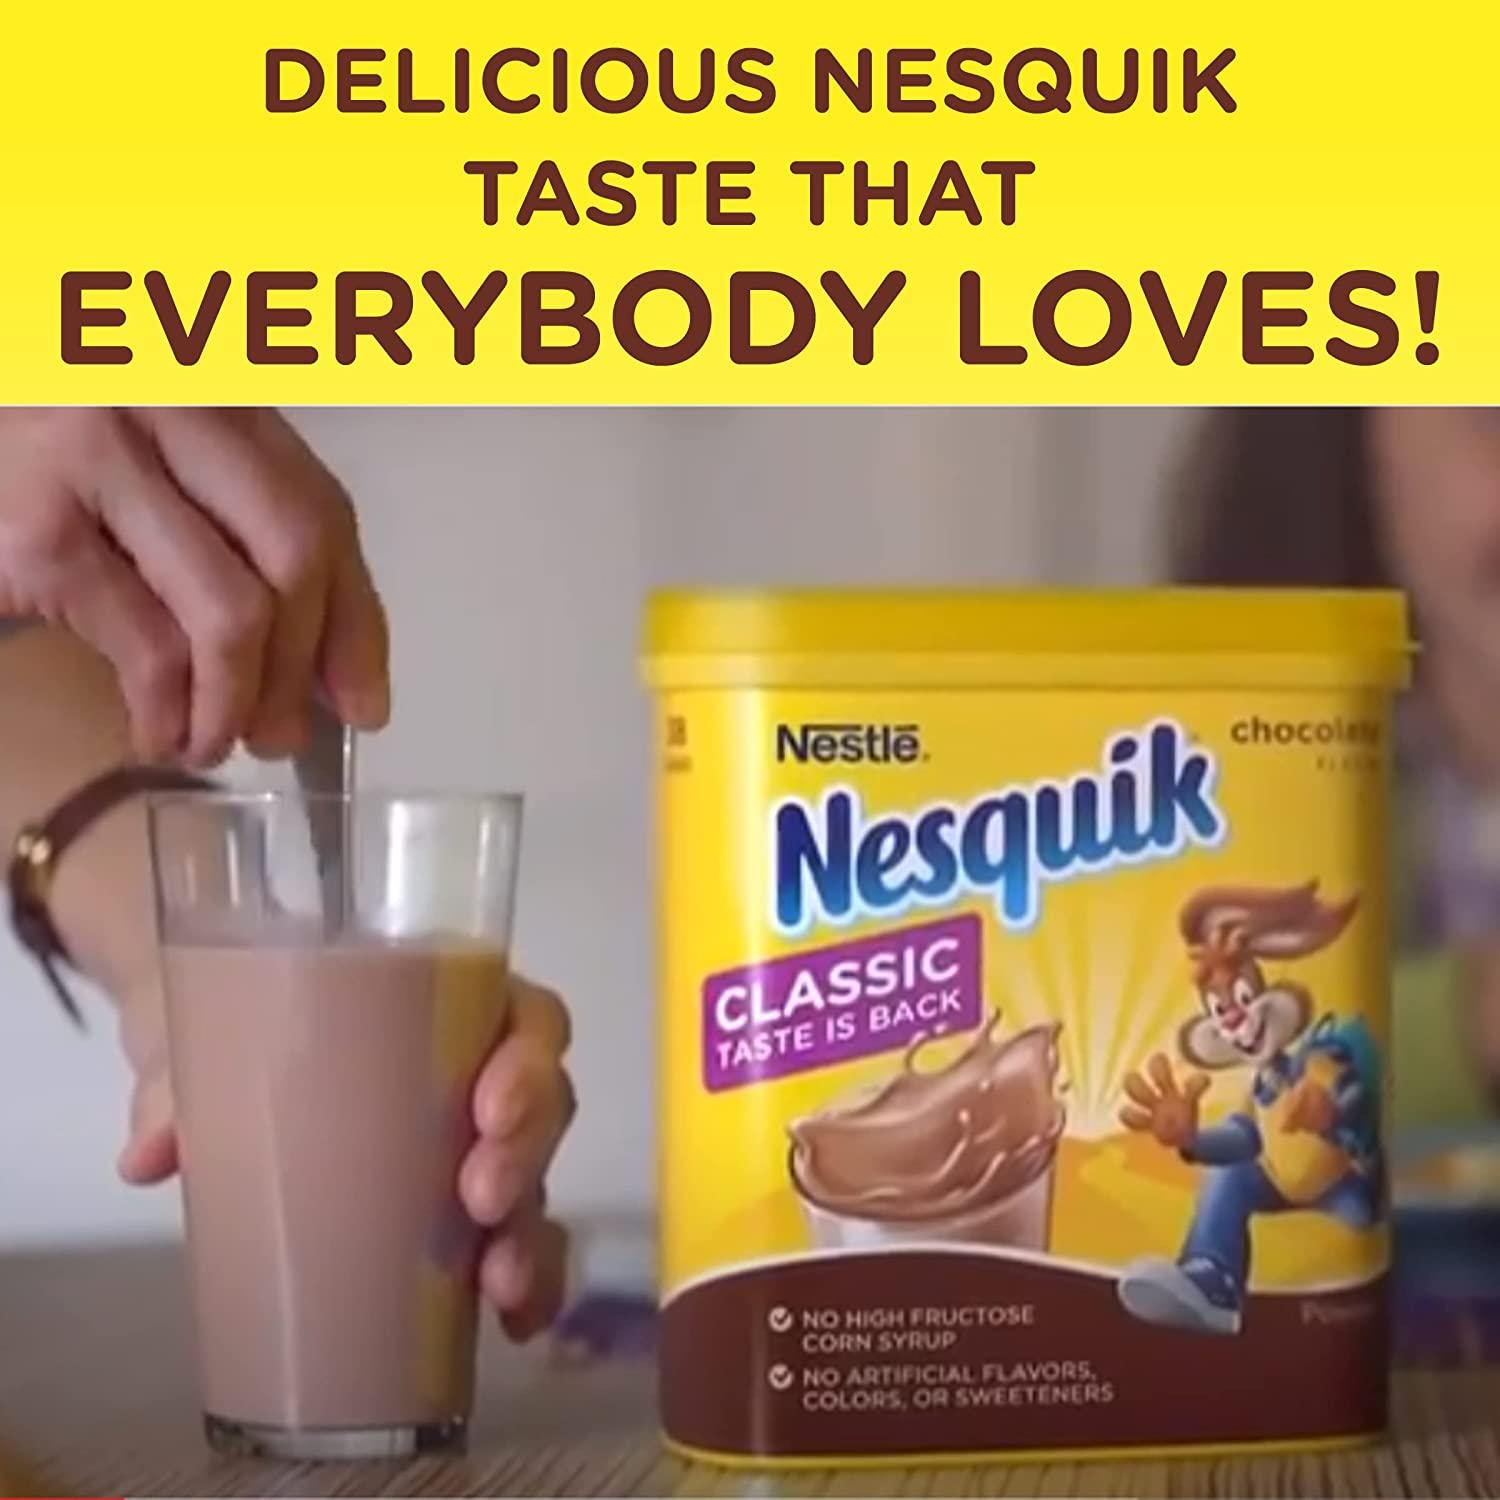 Child-Targeted Drink Pods : Nesquik hot chocolate pods